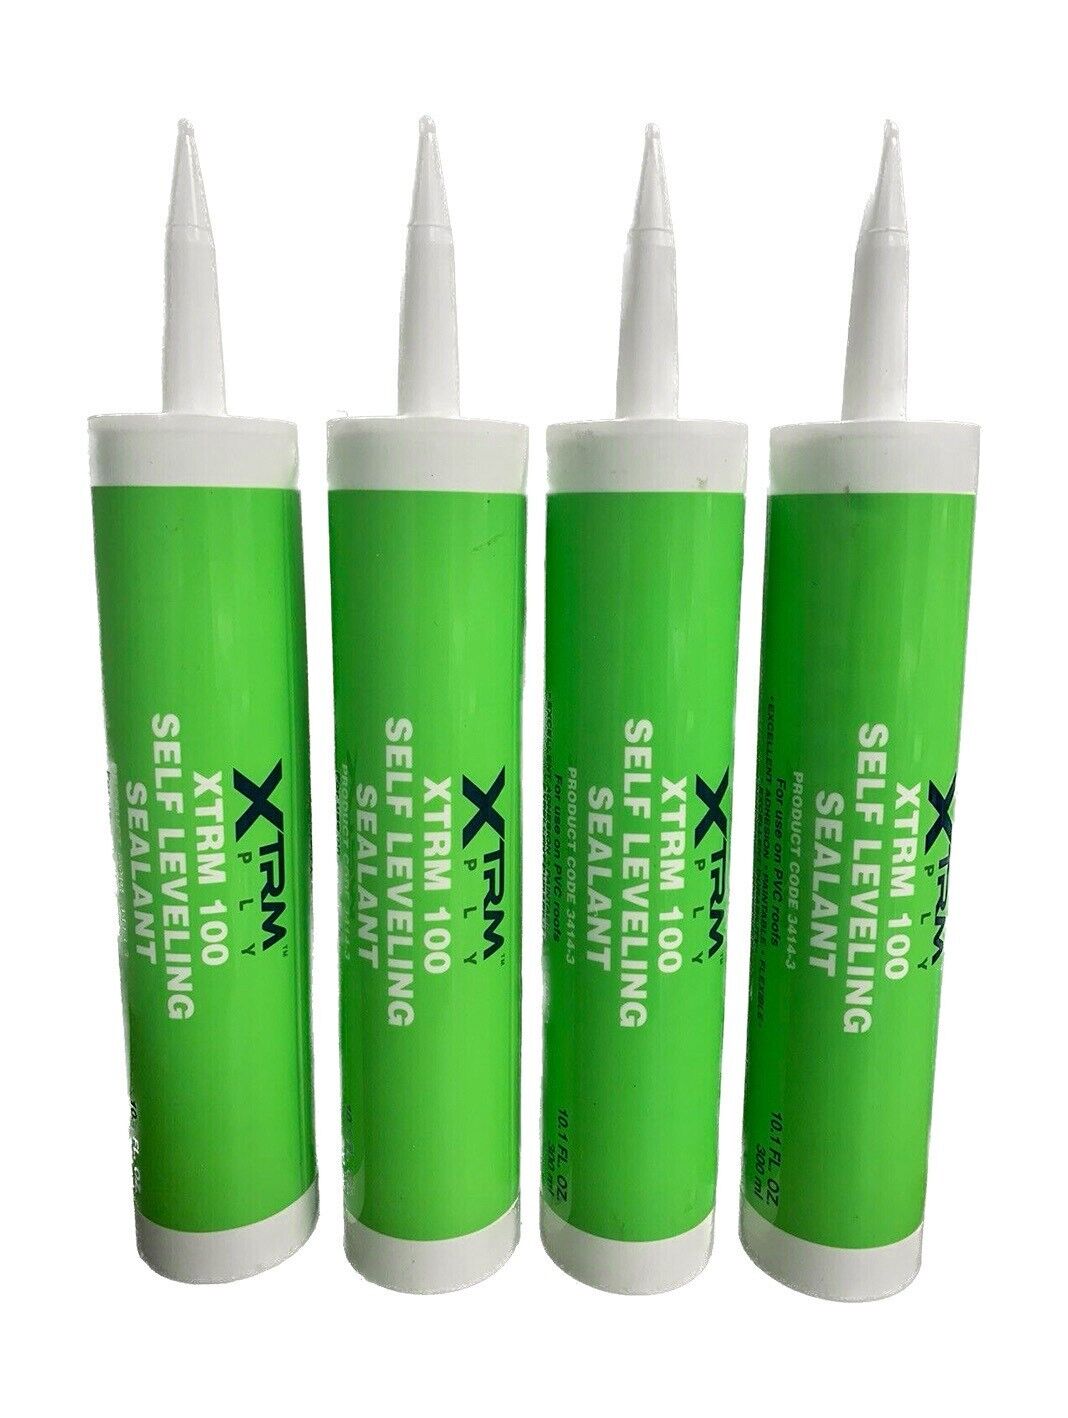 4 Pack XTRM 100 Camper Roof Self Leveling Sealant RV Rubber Roof Caulk White 